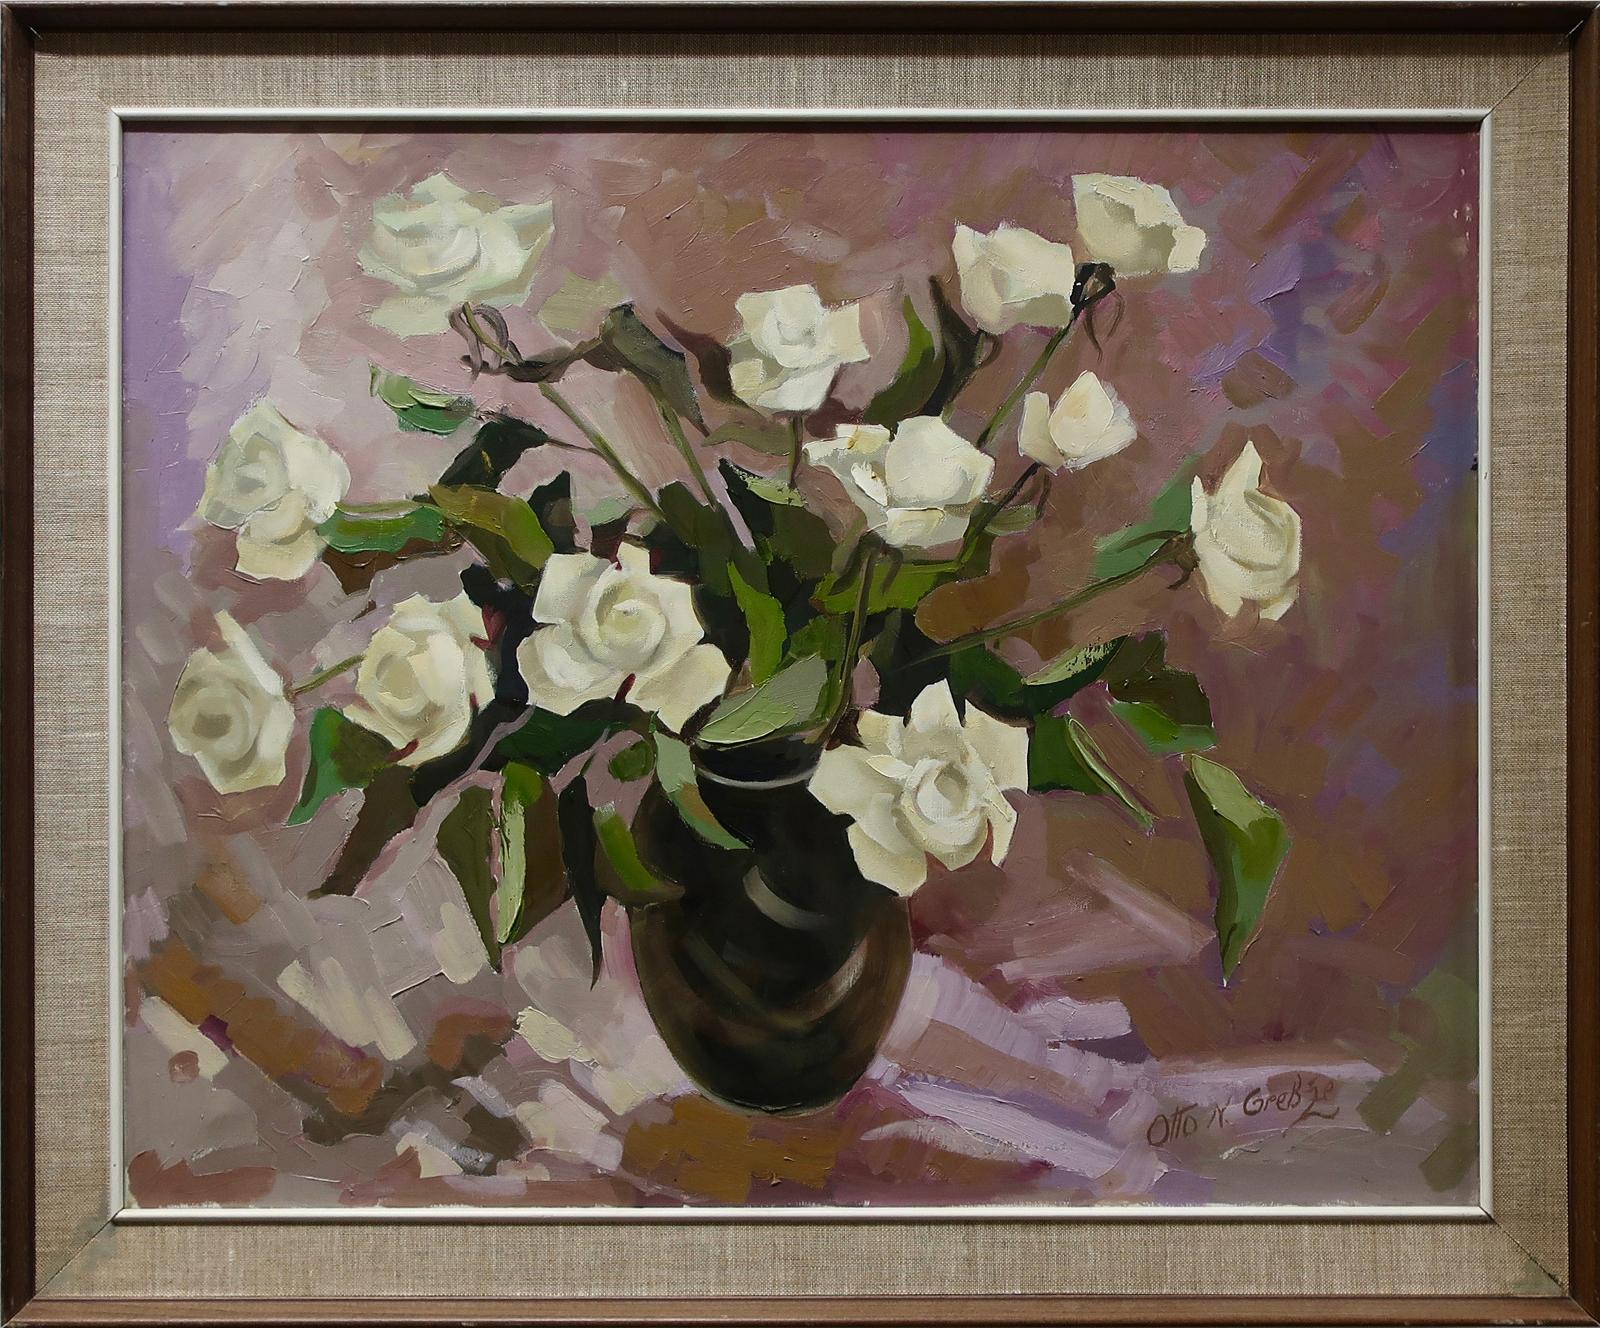 Otto N. Grebze (1910-1999) - Untitled (White Roses In A Dark Vase)